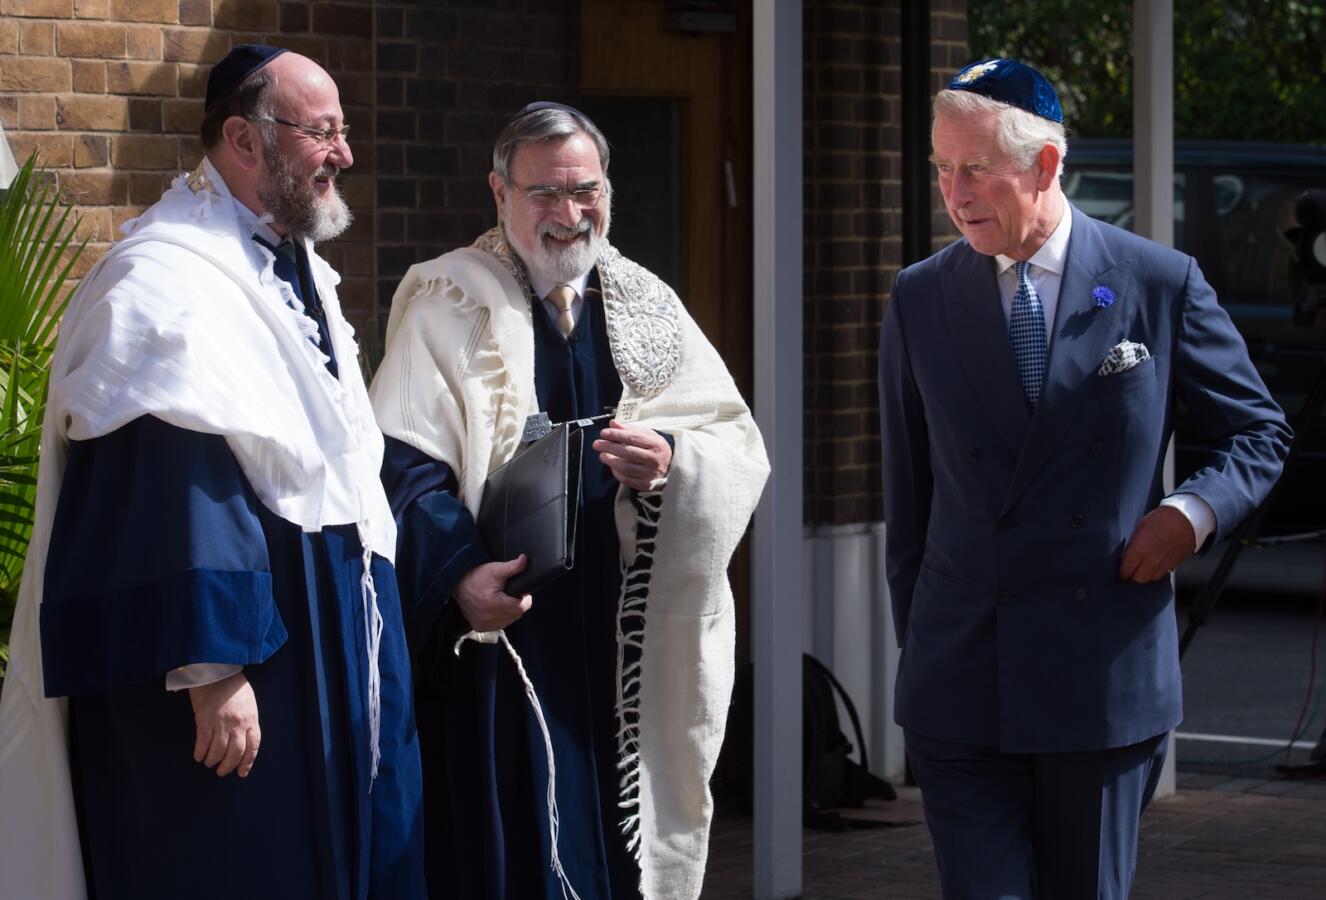 Britain's Prince Charles (R) meets Lord Jonathan Sacks (C) and his successor Chief Rabbi Ephraim Mirvis (L) before Mirvis was formally inducted as 11th Chief Rabbi of the United Hebrew Congregations of the UK and the Commonwealth at a ceremony at the St John's Wood Synagogue in north London on Spetember 1, 2013. AFP Photo / POOL / STEFAN ROUSSEAU (Photo credit should read STEFAN ROUSSEAU/AFP via Getty Images)